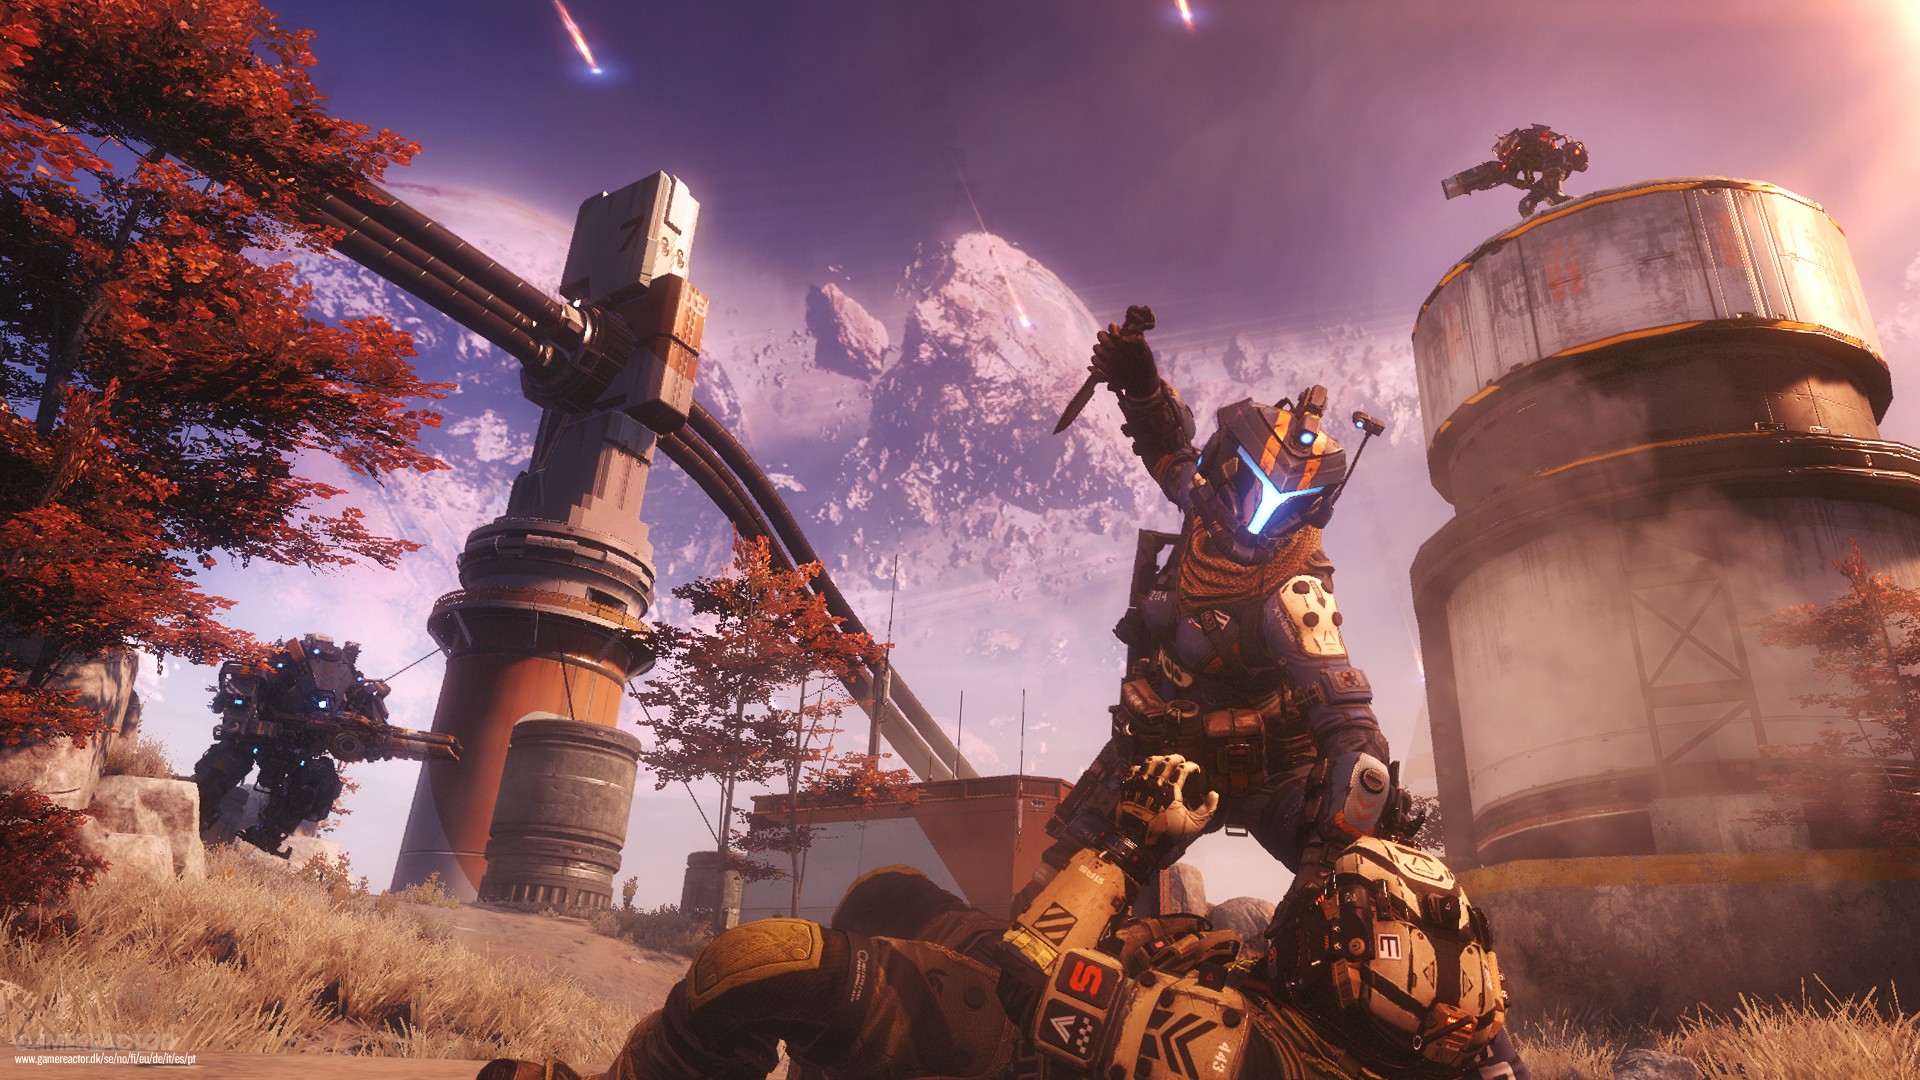 Is Titanfall 2 Cross-Platform in 2022 Up-To-Date - Gamevcore